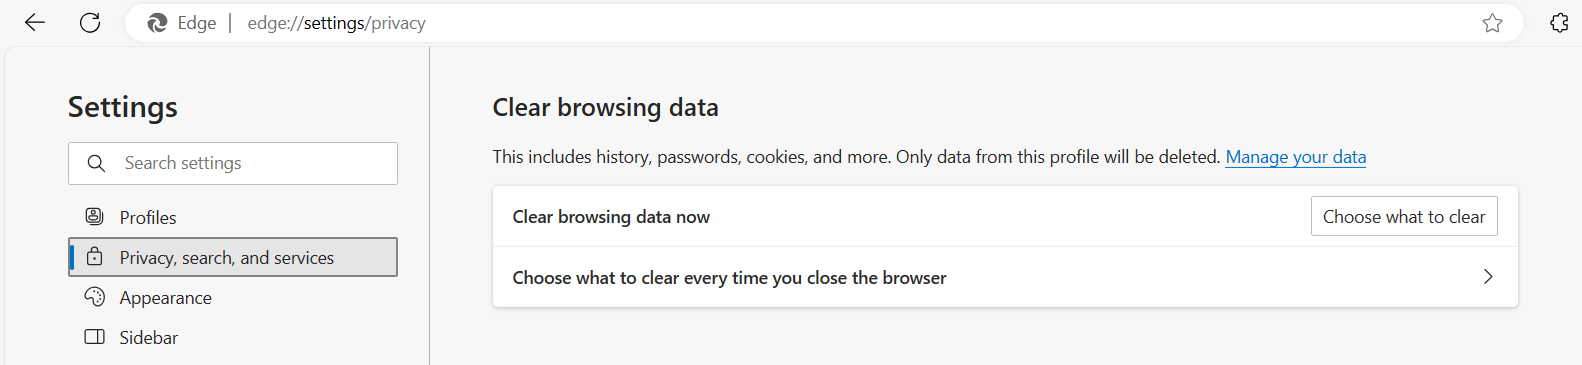 under Clear browsing data